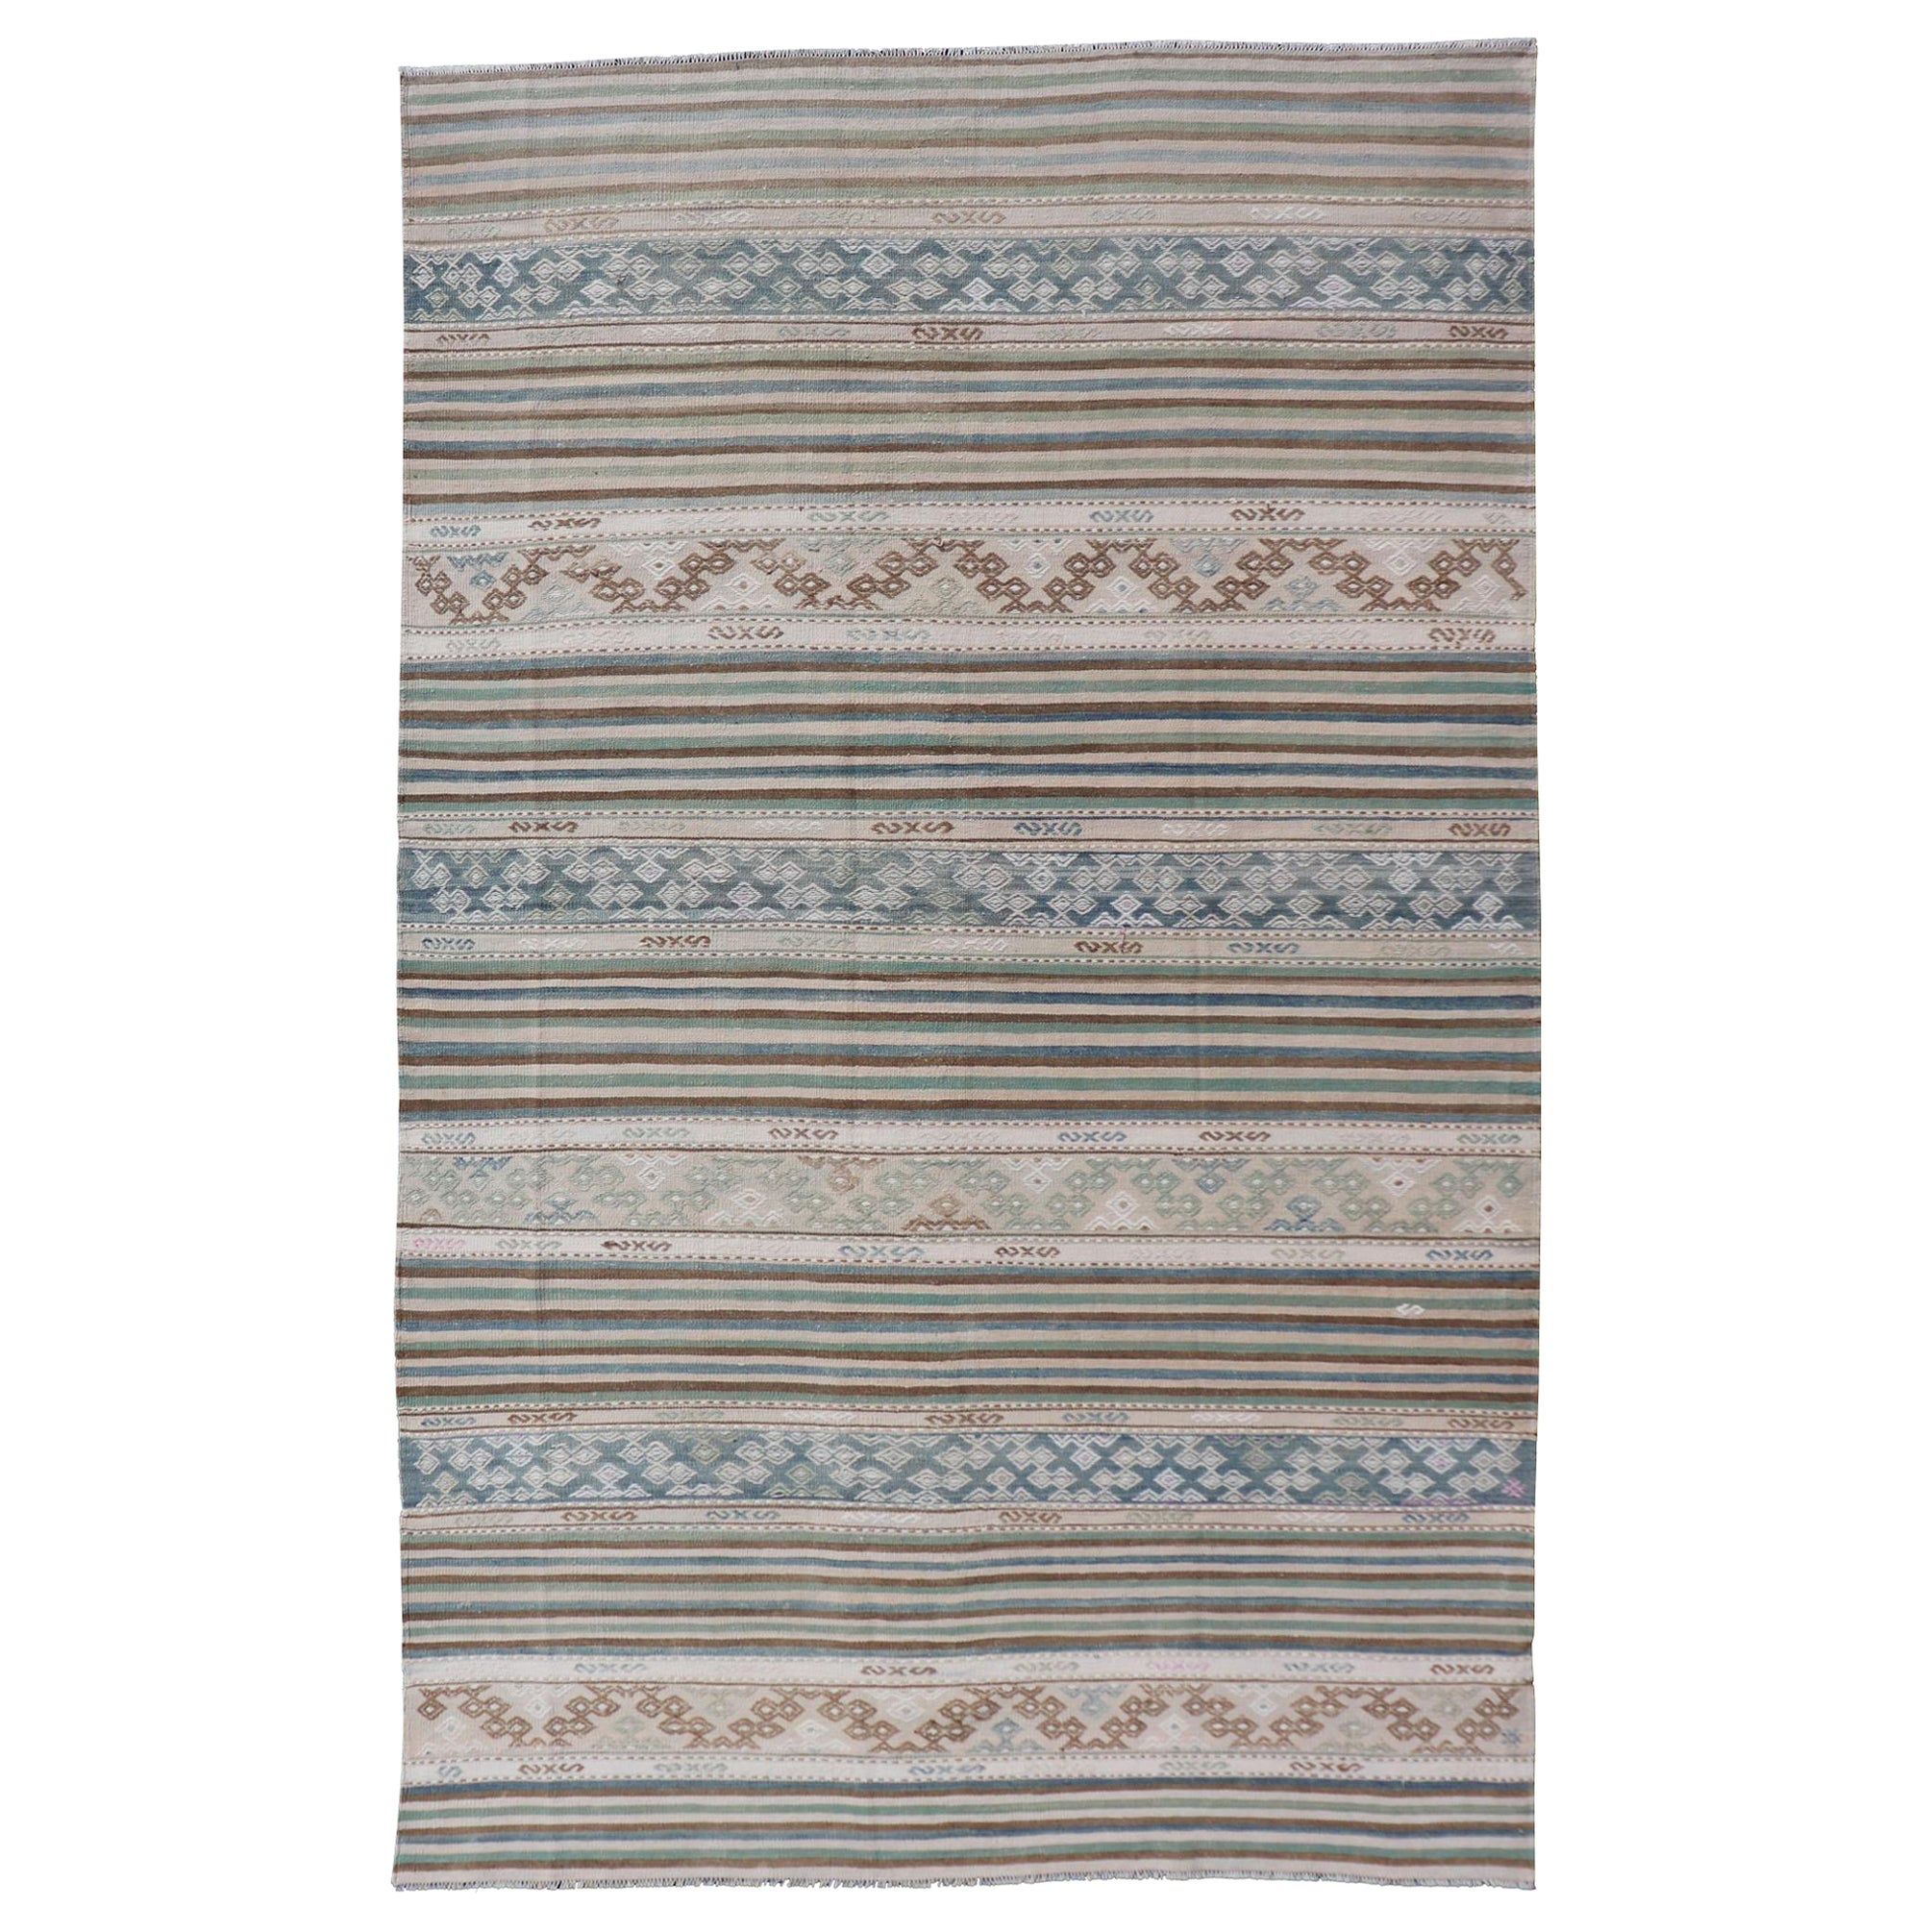 Turkish Flat-Weave Kilim with Stripes and Embroideries In Blue, Green, and Cream For Sale